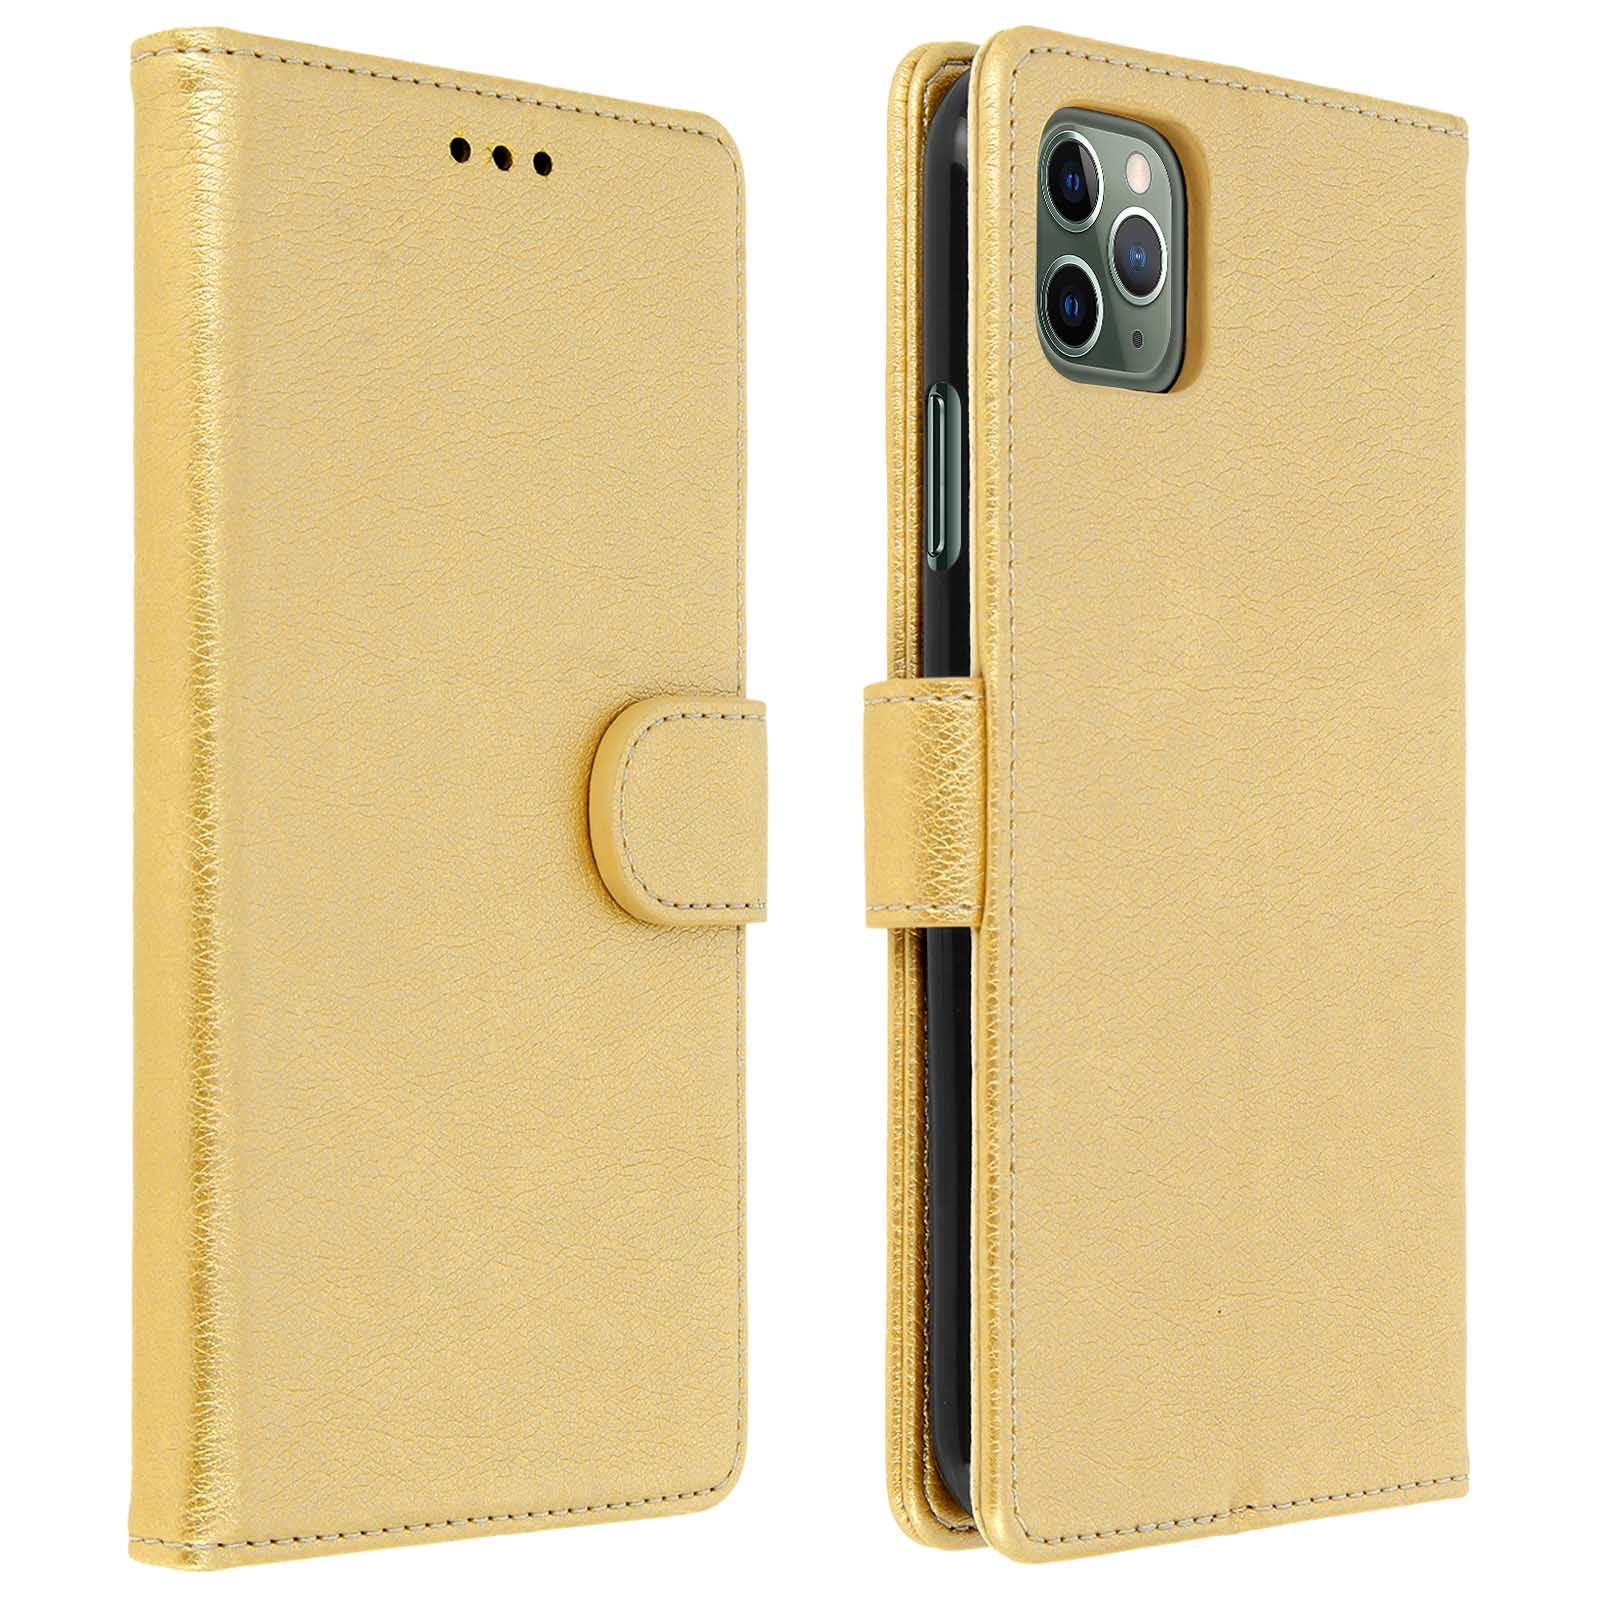 Chester Bookcover, Series, 11 Pro, iPhone Gold AVIZAR Apple,